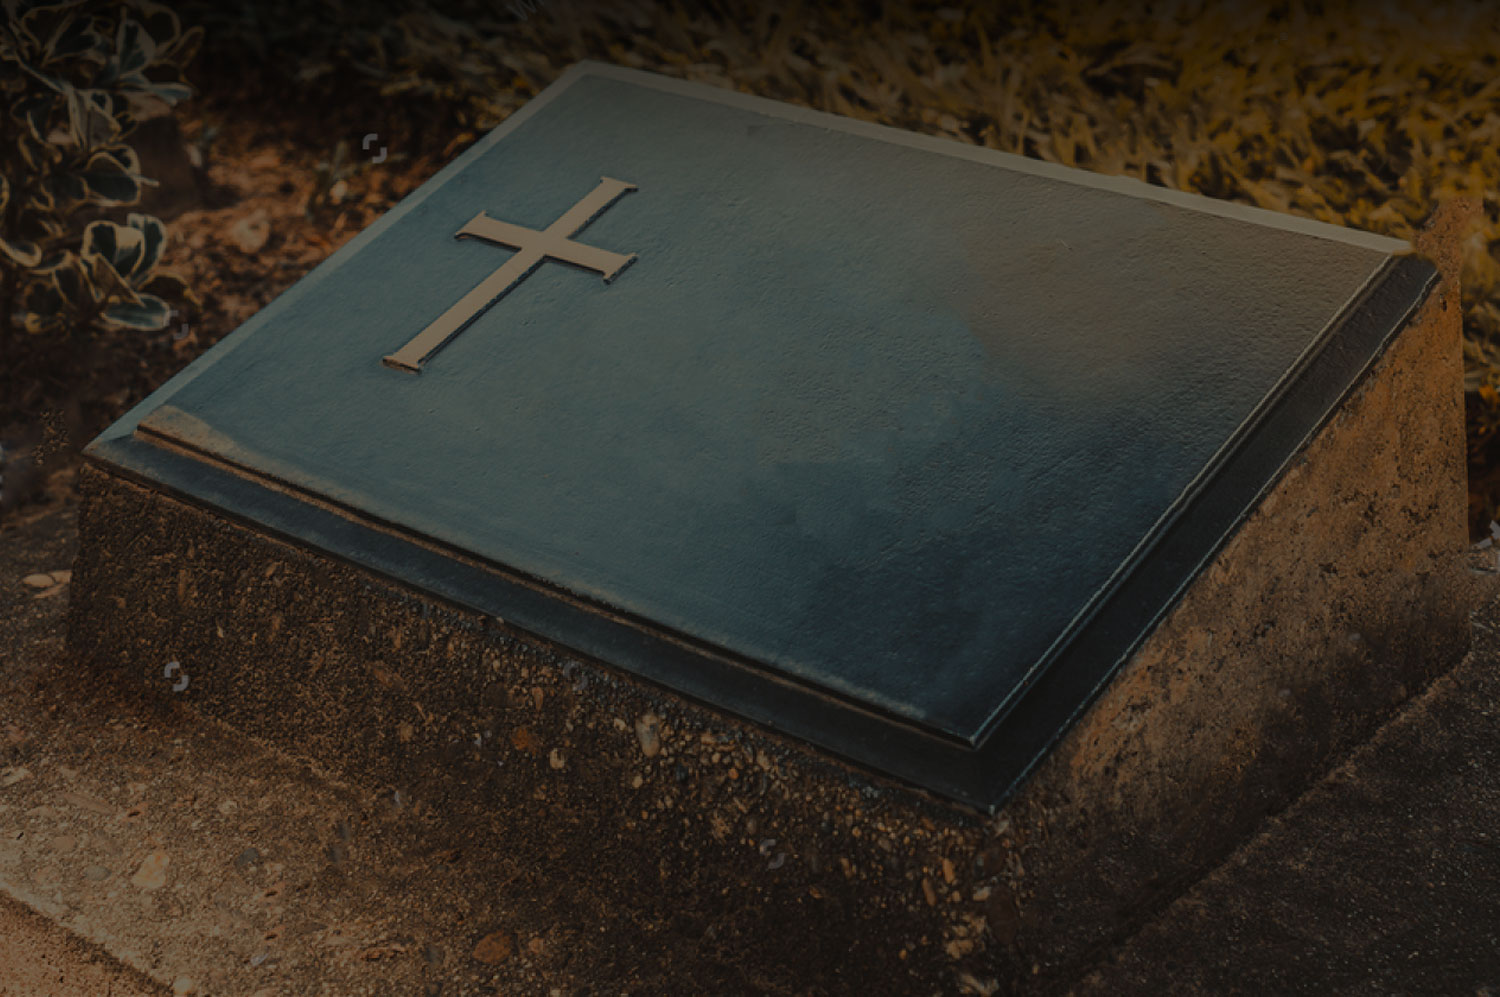 A blue book with a cross on it.